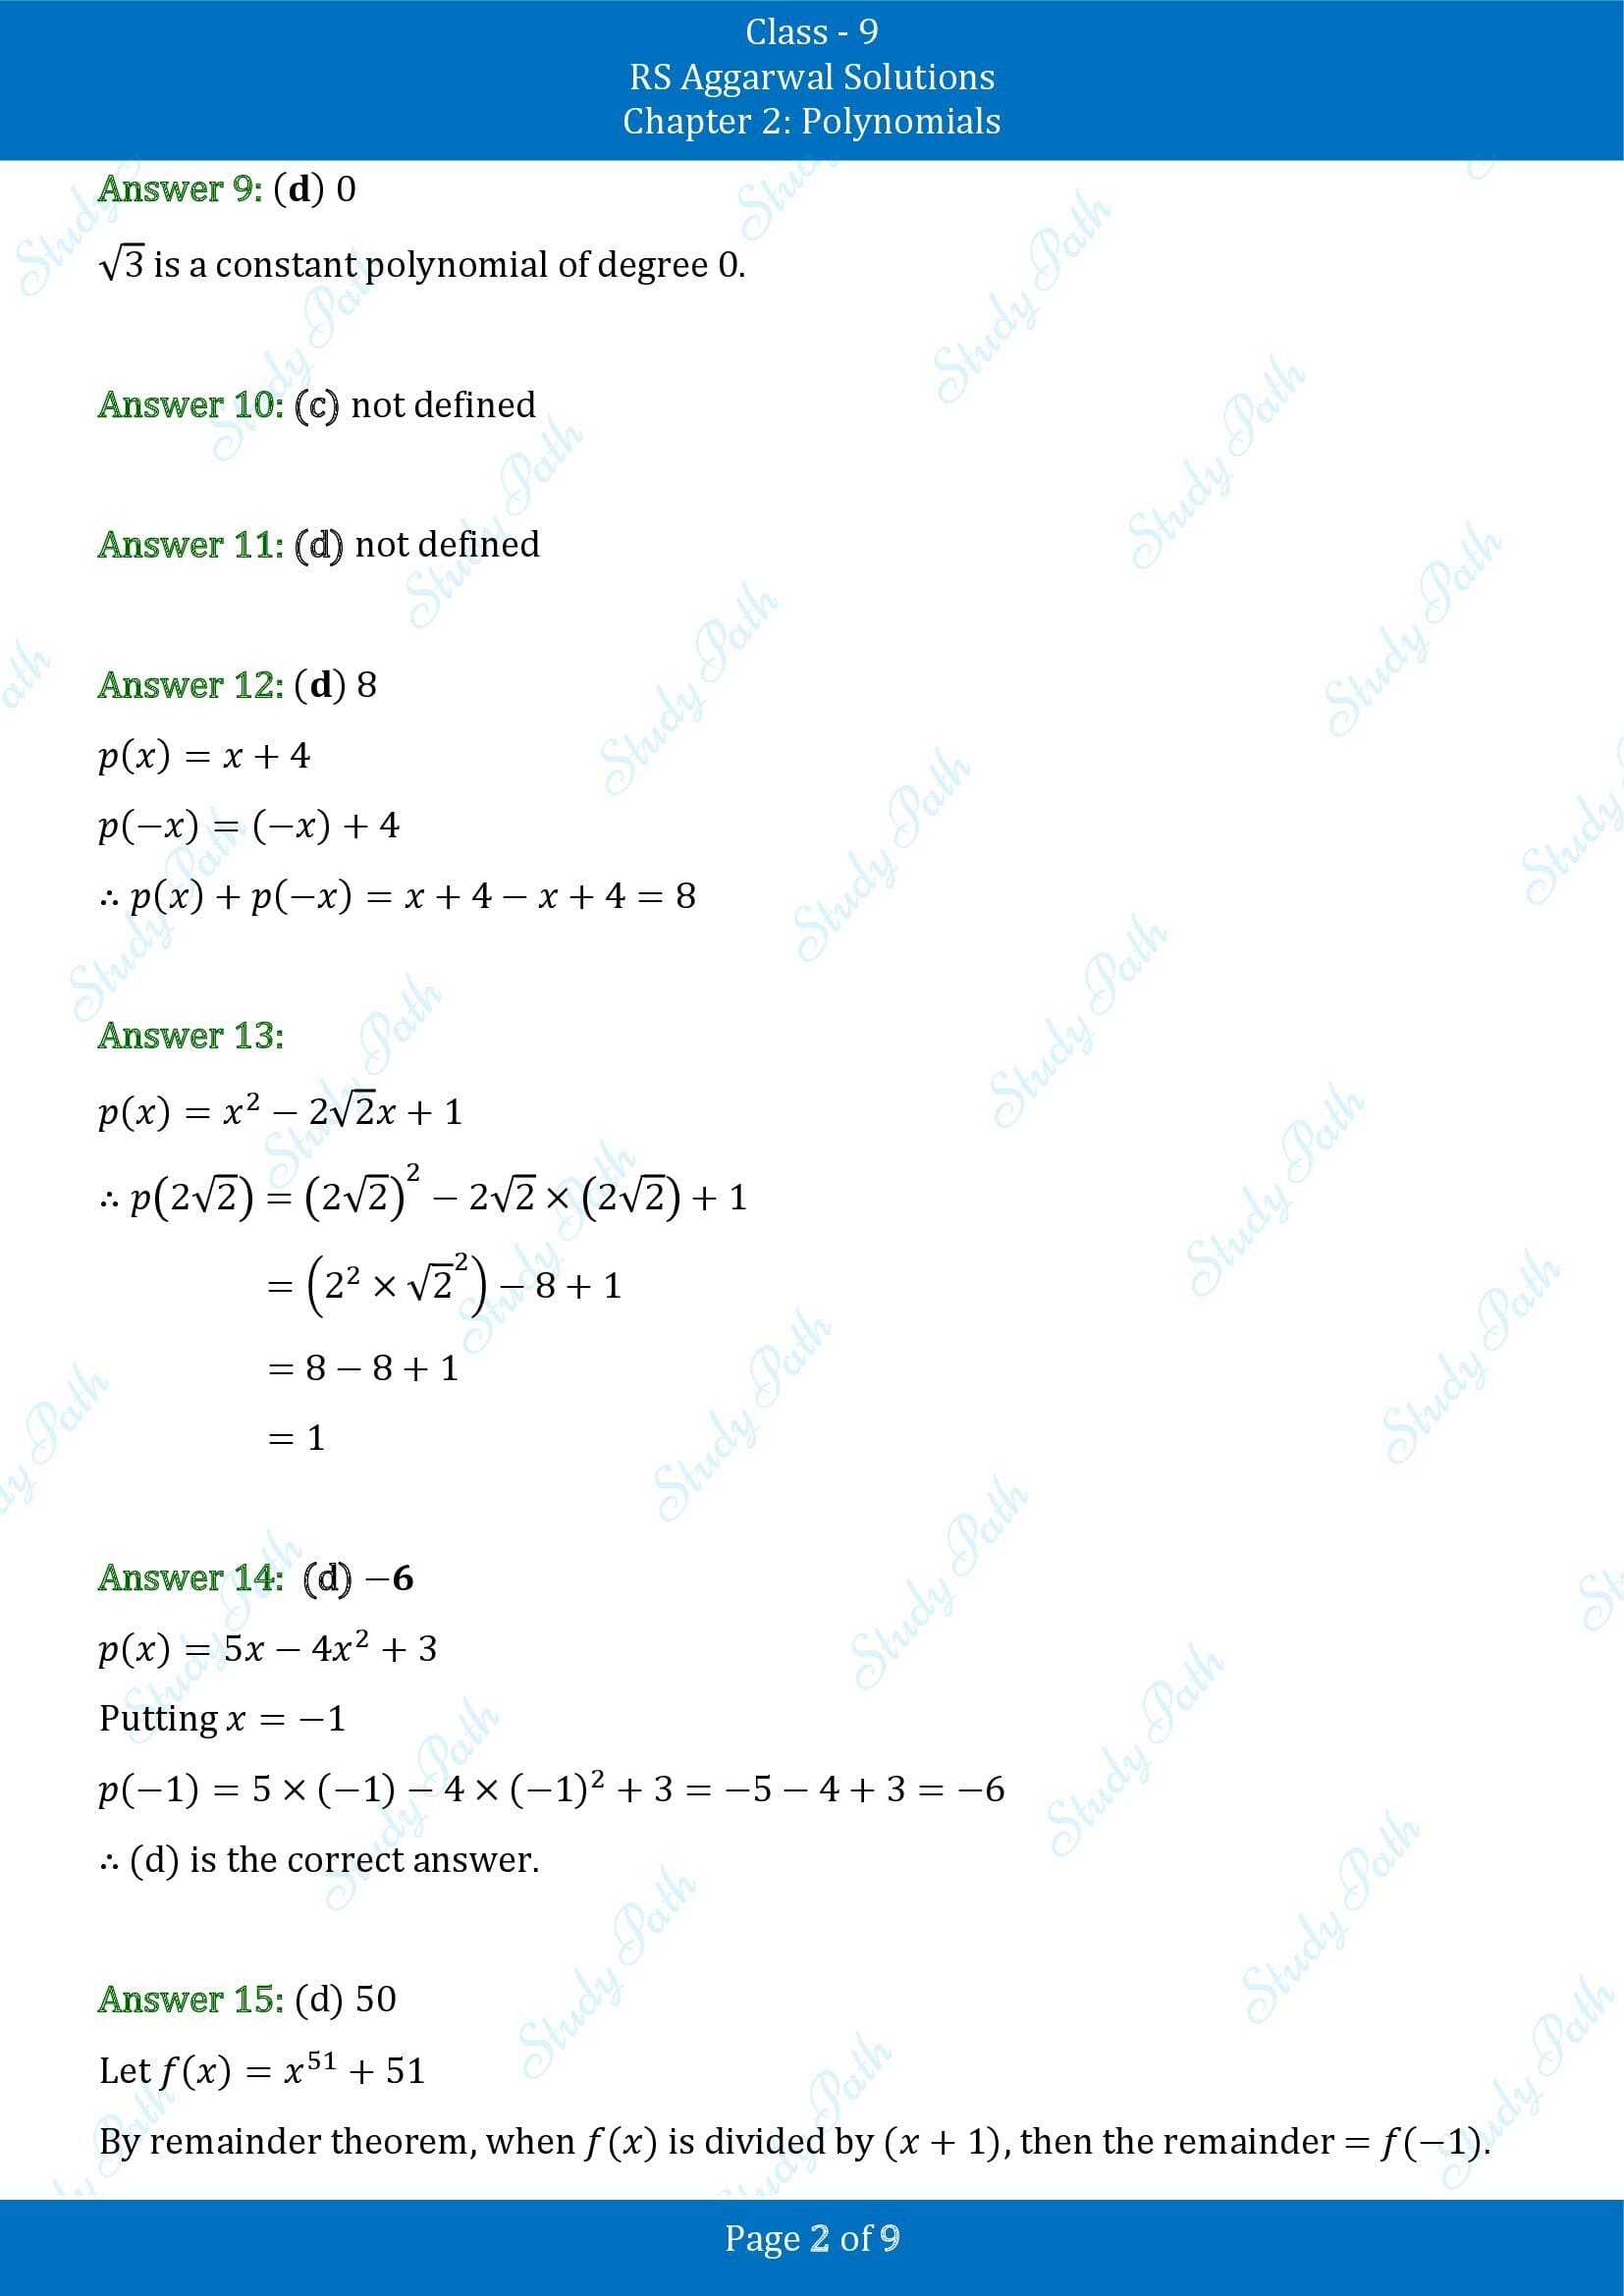 RS Aggarwal Solutions Class 9 Chapter 2 Polynomials Multiple Choice Questions MCQs 00002